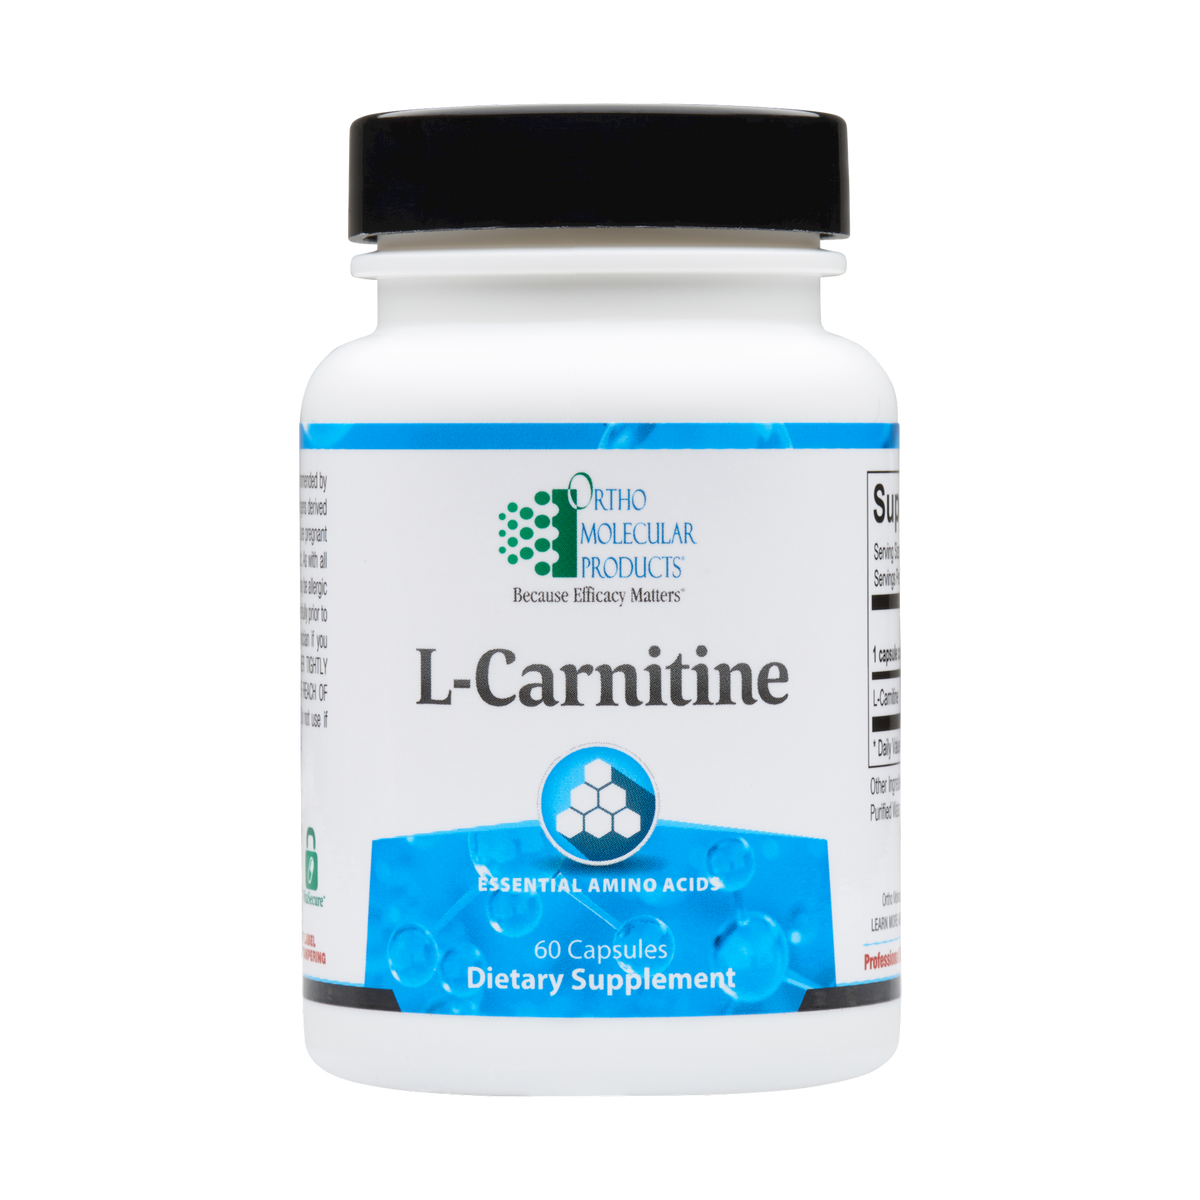 L Carnitine 60 capsules (Previously carried L Carnitine by Pure)